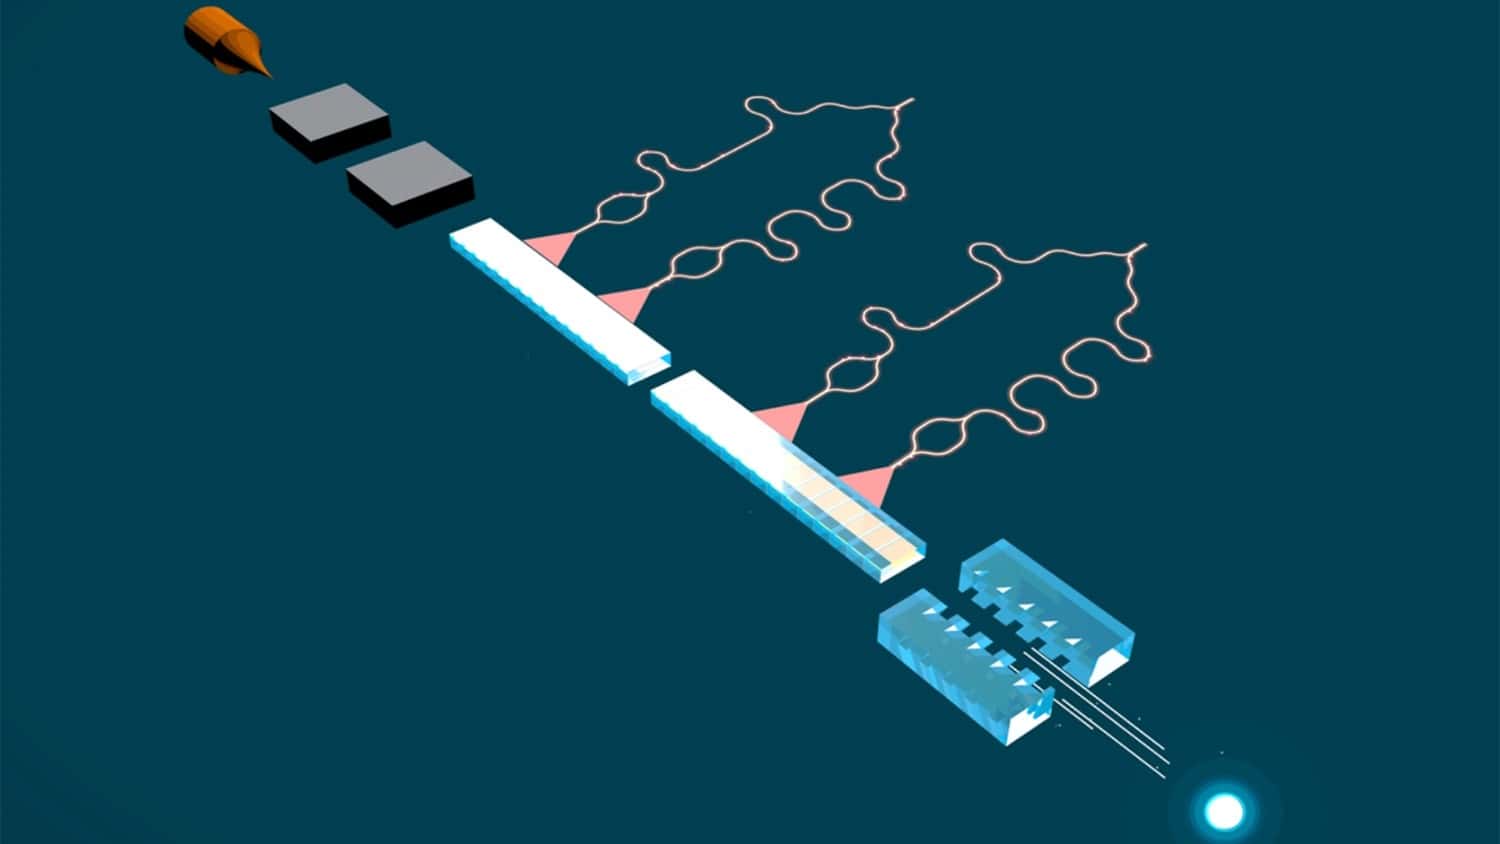 Physics World reports on new Dielectric Laser Accelerator technology that produces highly focused electron beams.